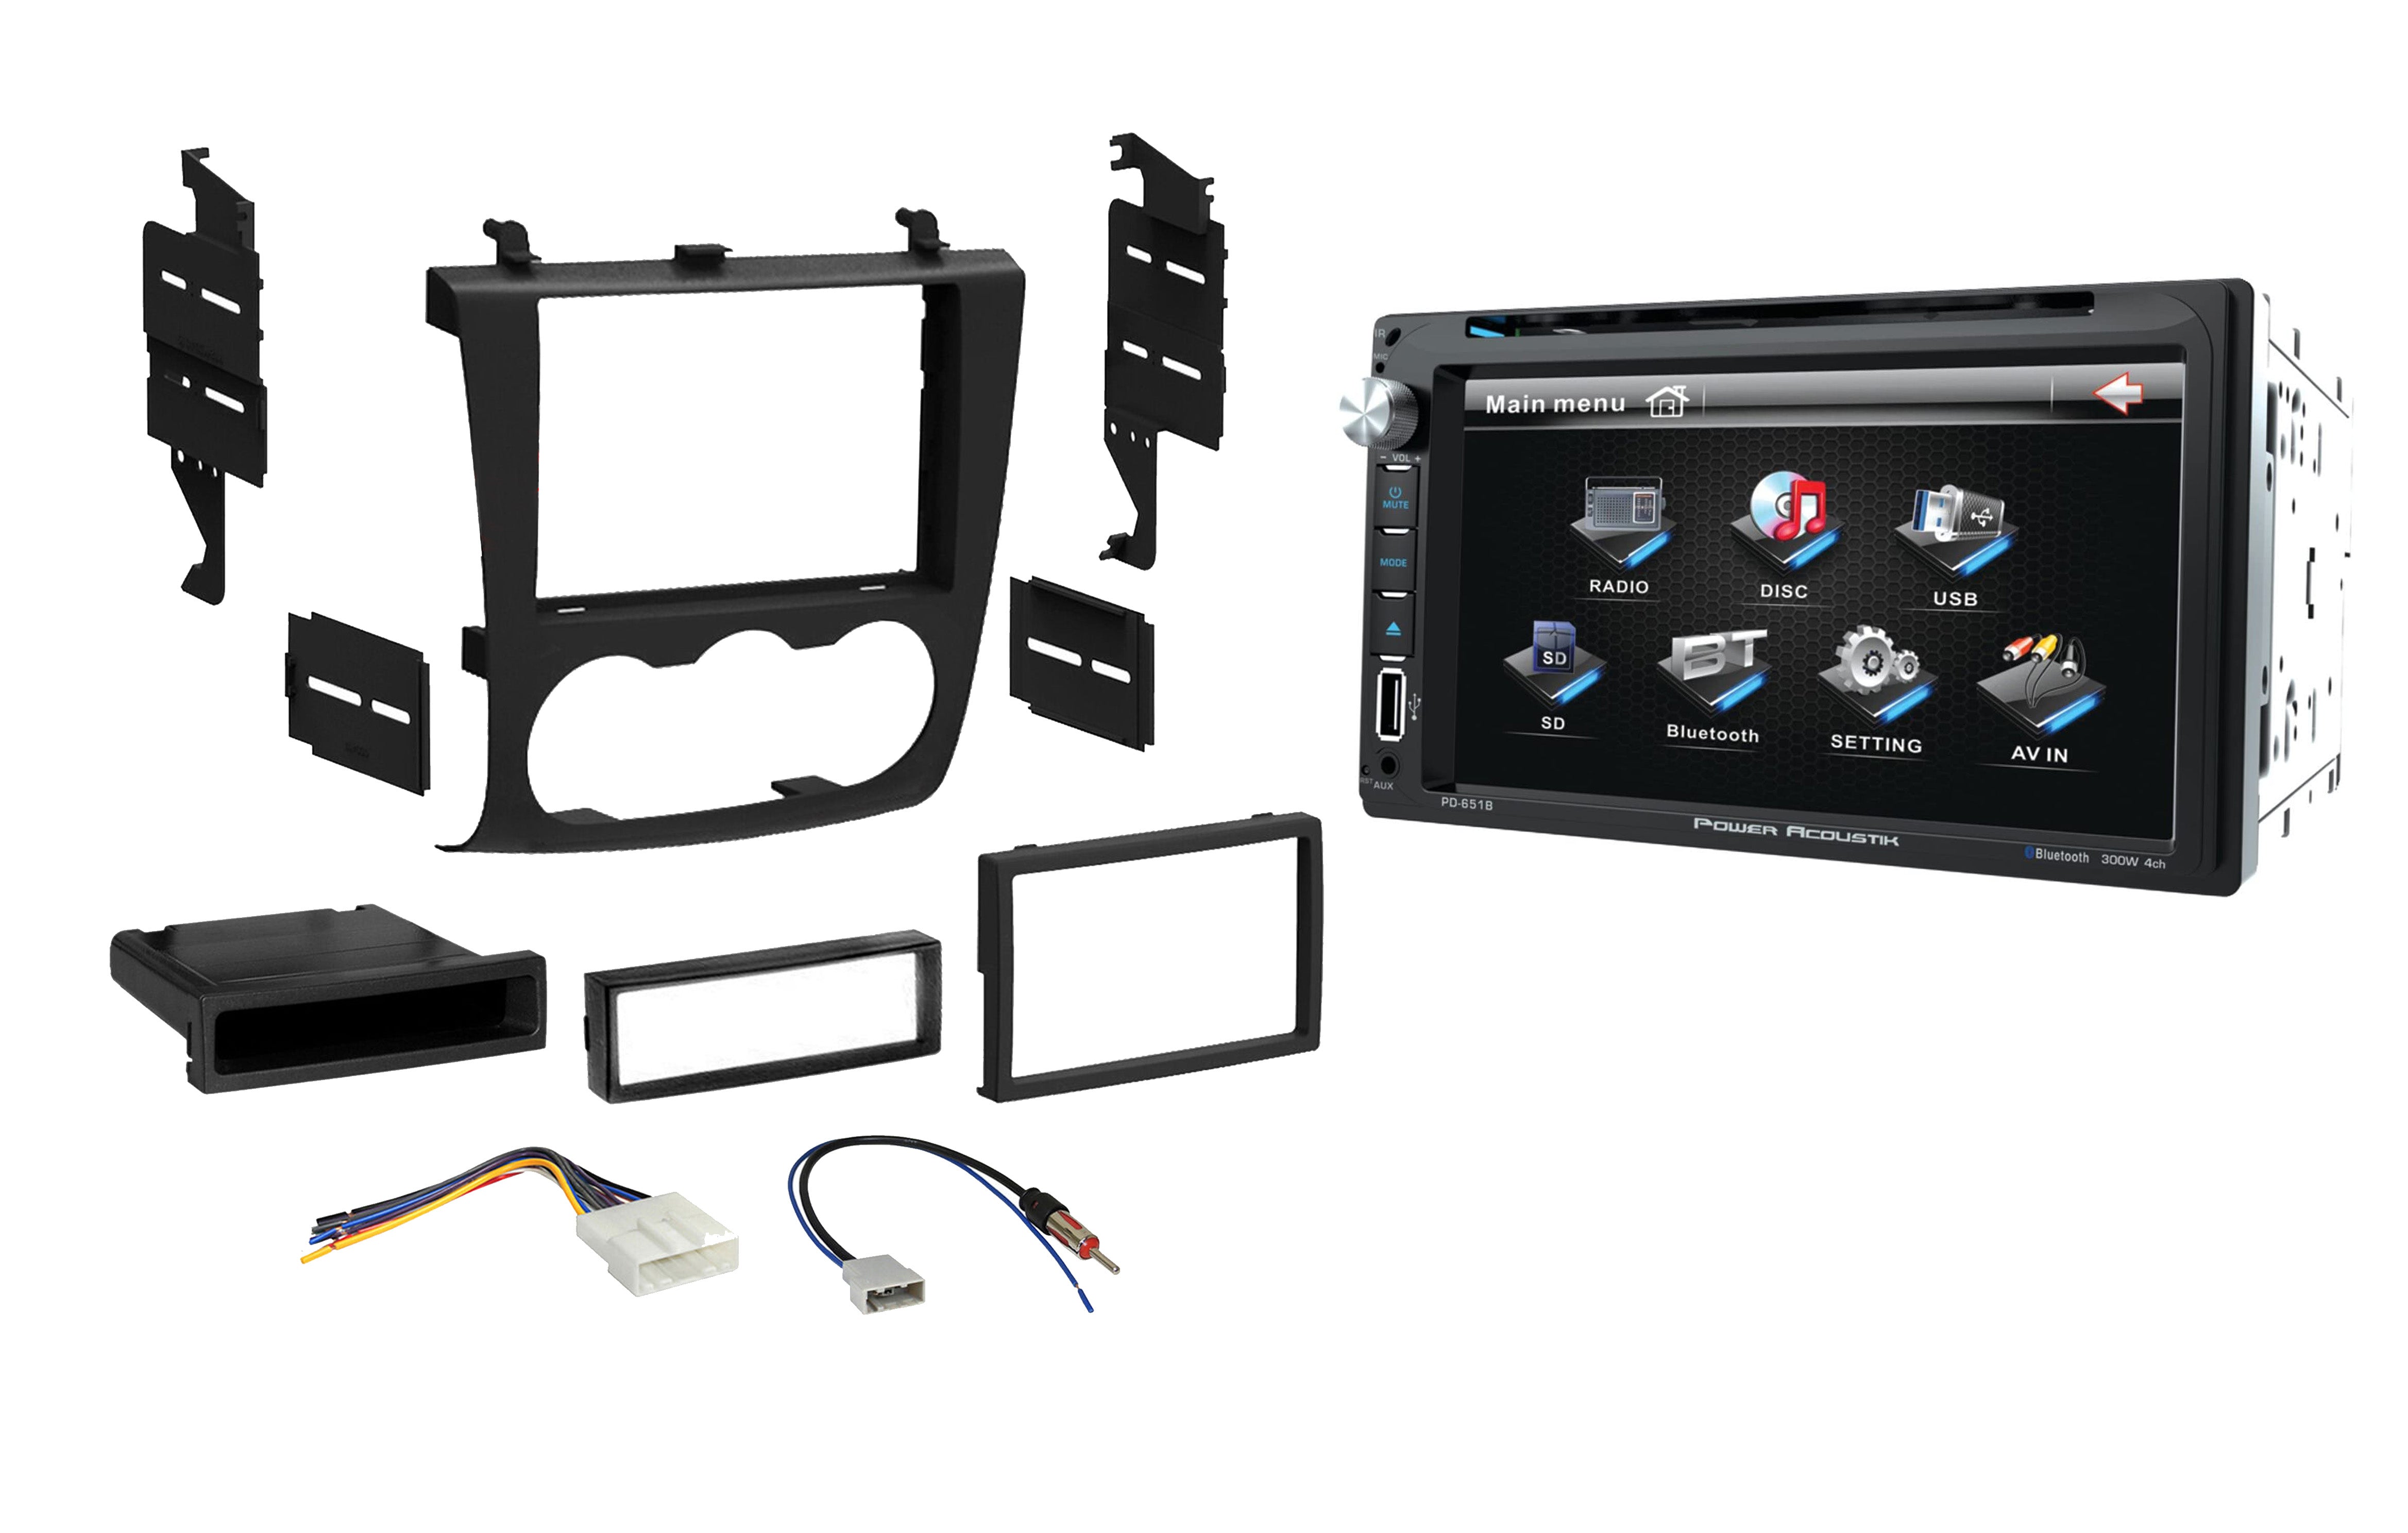 Power Acoustik PD-651B Double DIN Bluetooth In-Dash DVD/CD/AM/FM Car Stereo w/ 6.5" Touchscreen and SD/USB Reader &  Single Double DIN Dash Kit Harness for 2007-2012 Nissan Altima